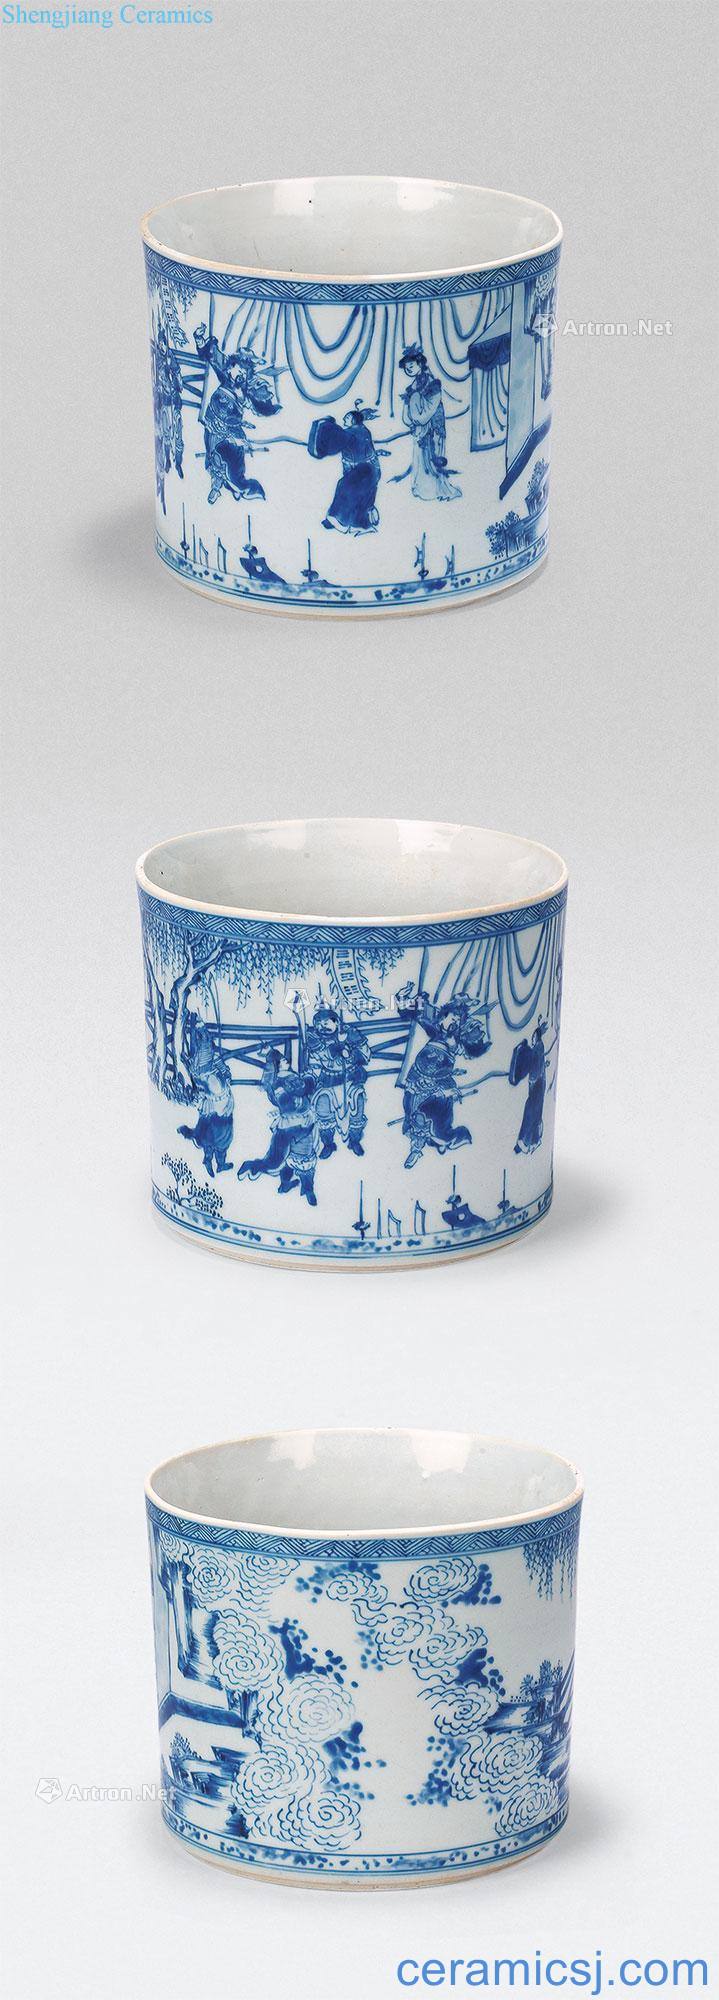 The qing emperor kangxi character pen container (a)